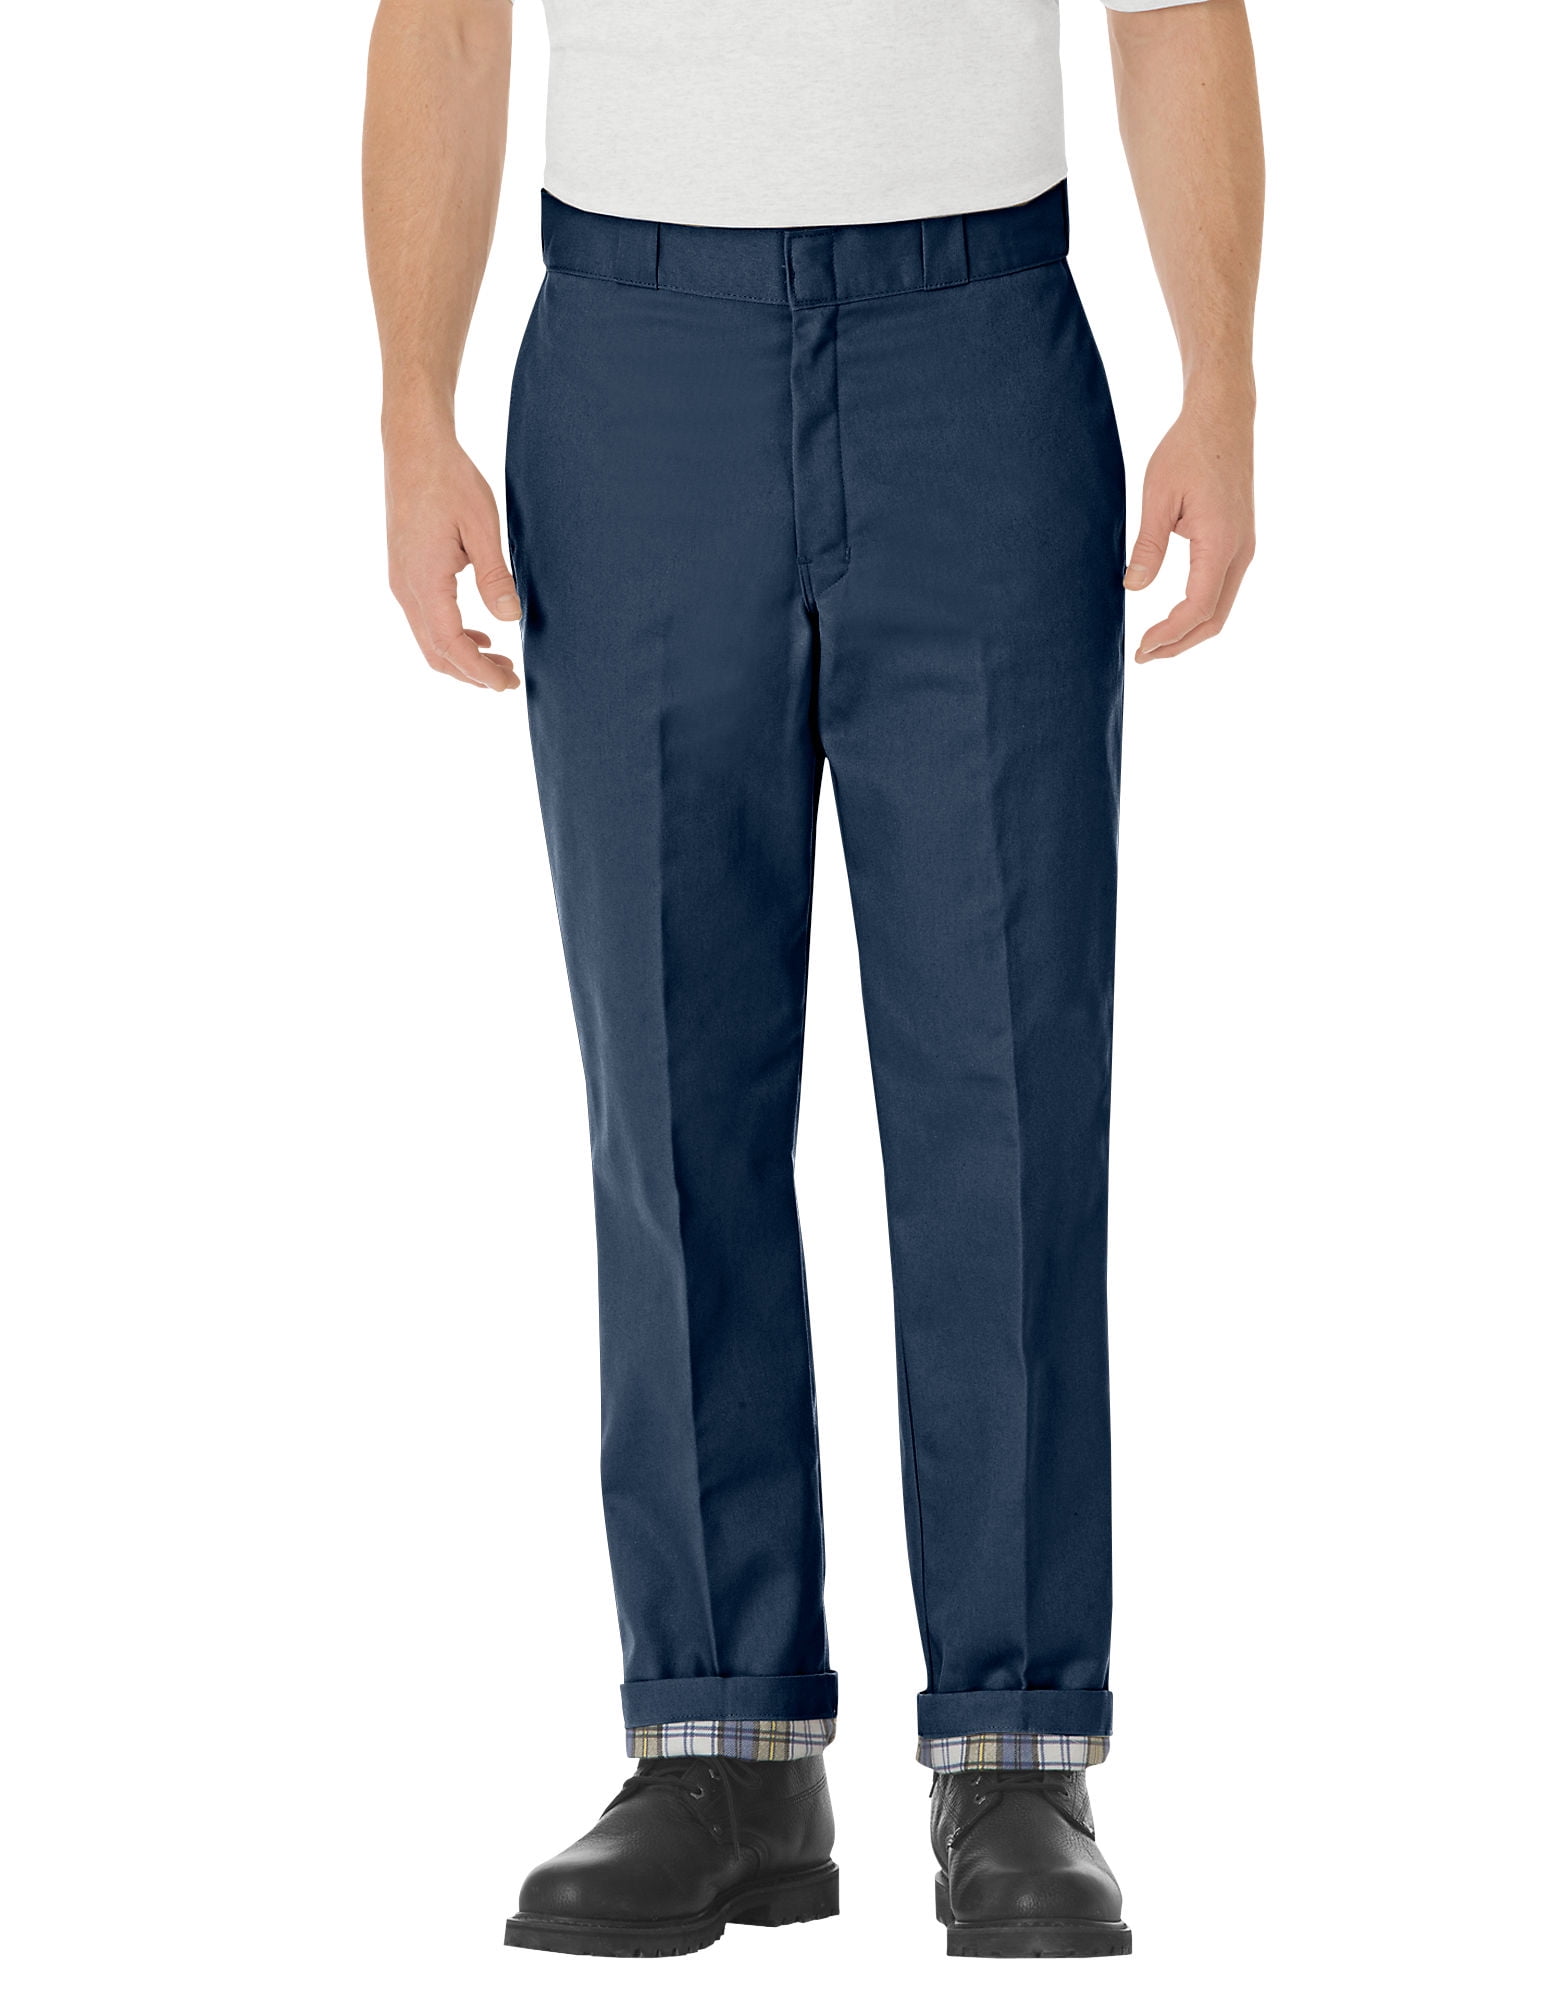 Dickies Mens Relaxed Fit Flannel Lined Work Pants, 42W x 32L, Navy ...